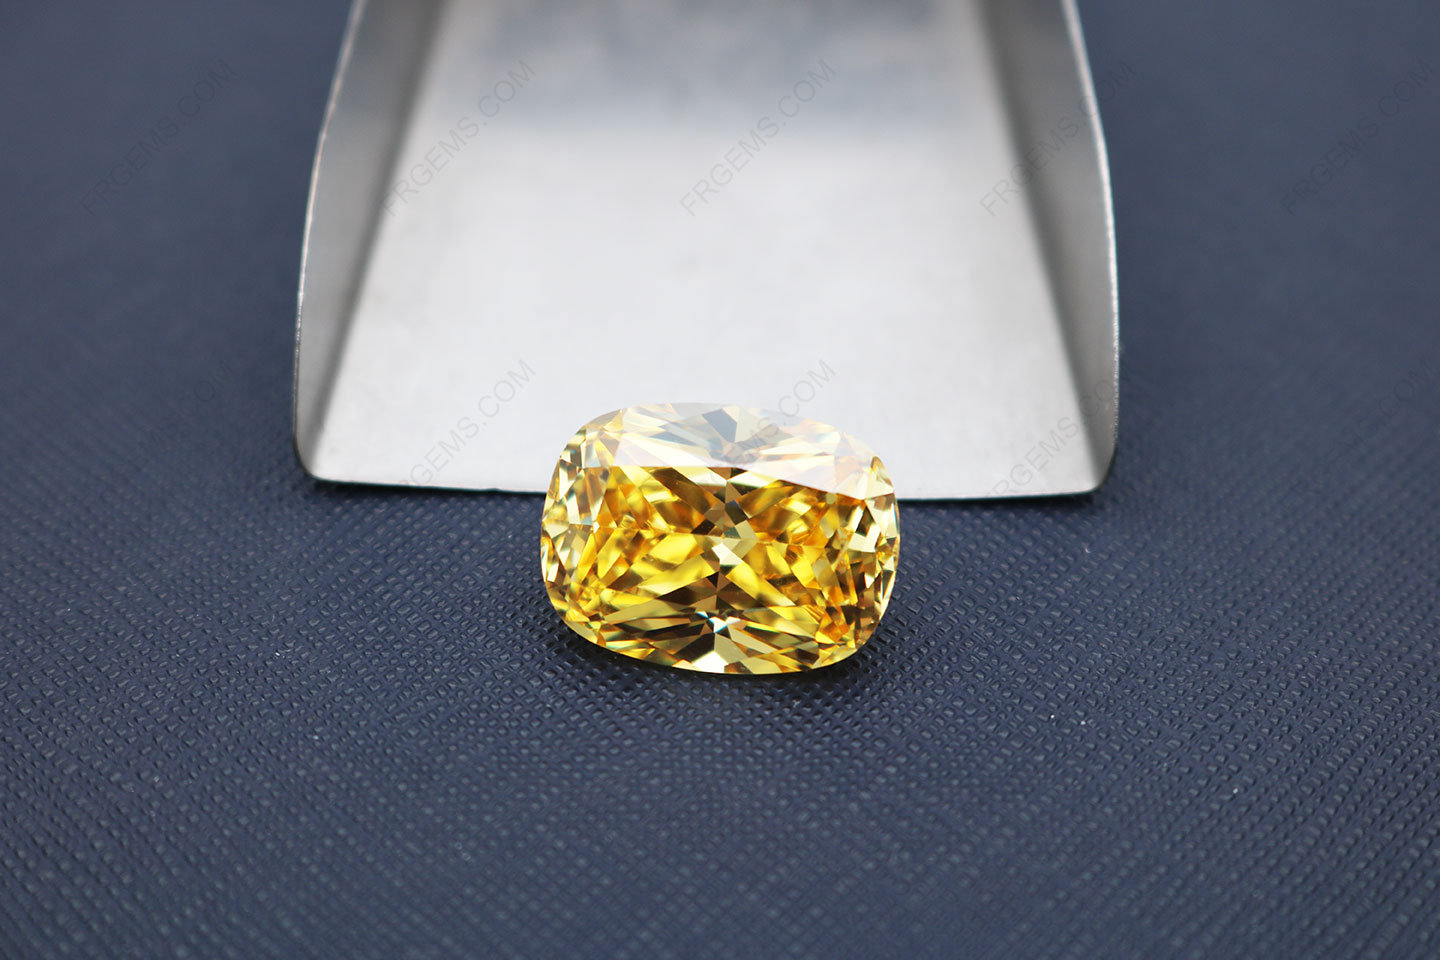 AAAAA 5A best top quality Canary Yellow Color Cubic Zirconia Elongated Cushion Shape Faceted Cut 15x20mm gemstones